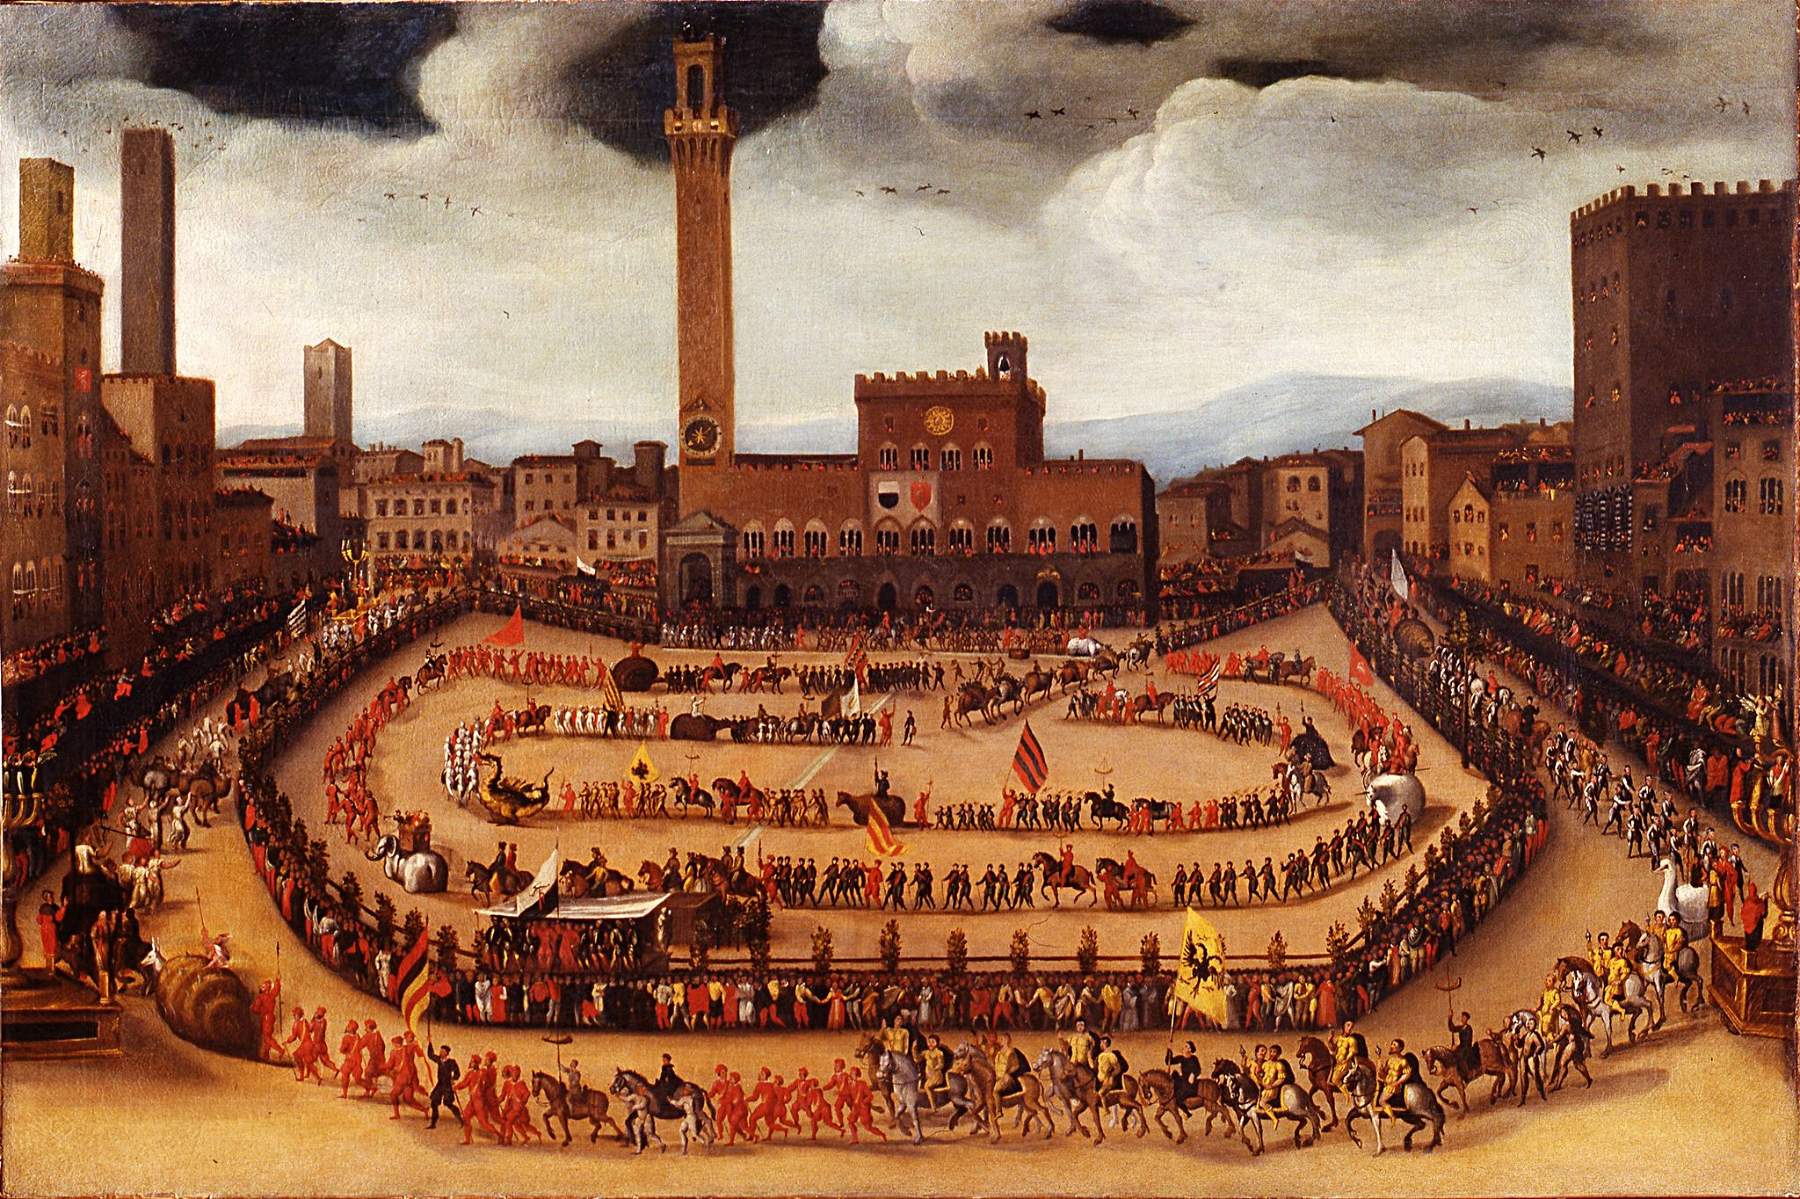 Two important views of Piazza del Campo in the 1500s arrive in Siena from the Uffizi.